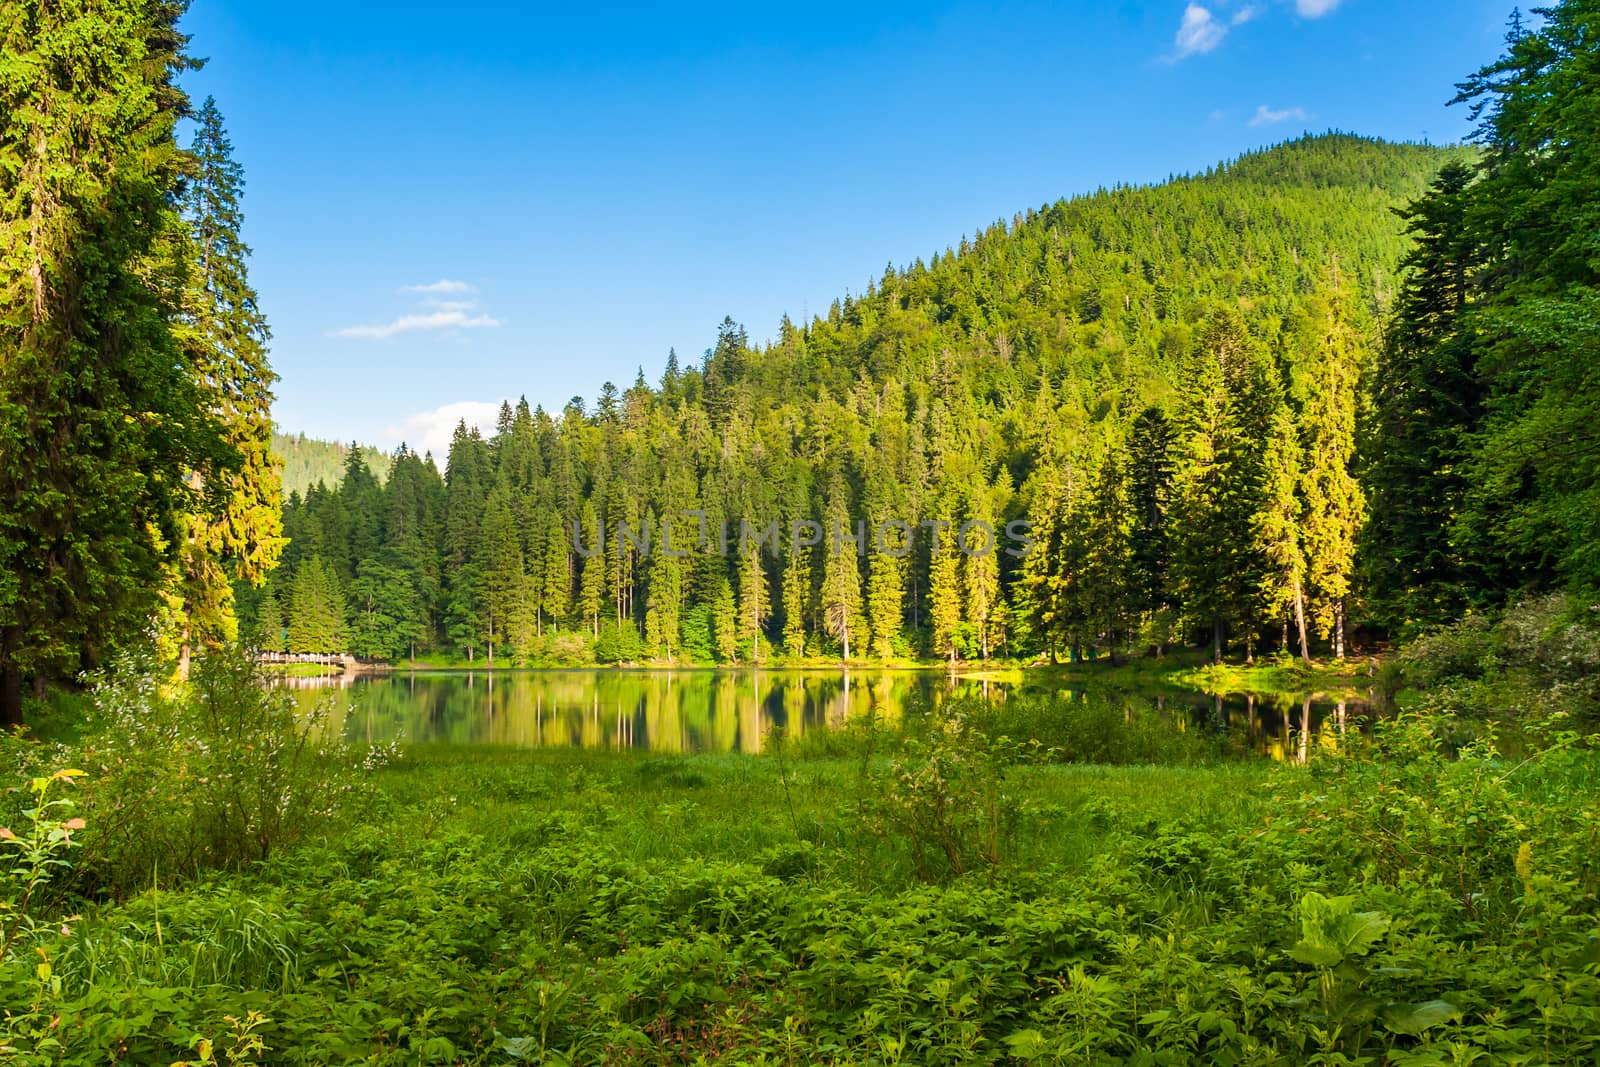 Forest reflection on the water surface of the lake on the background of mountains